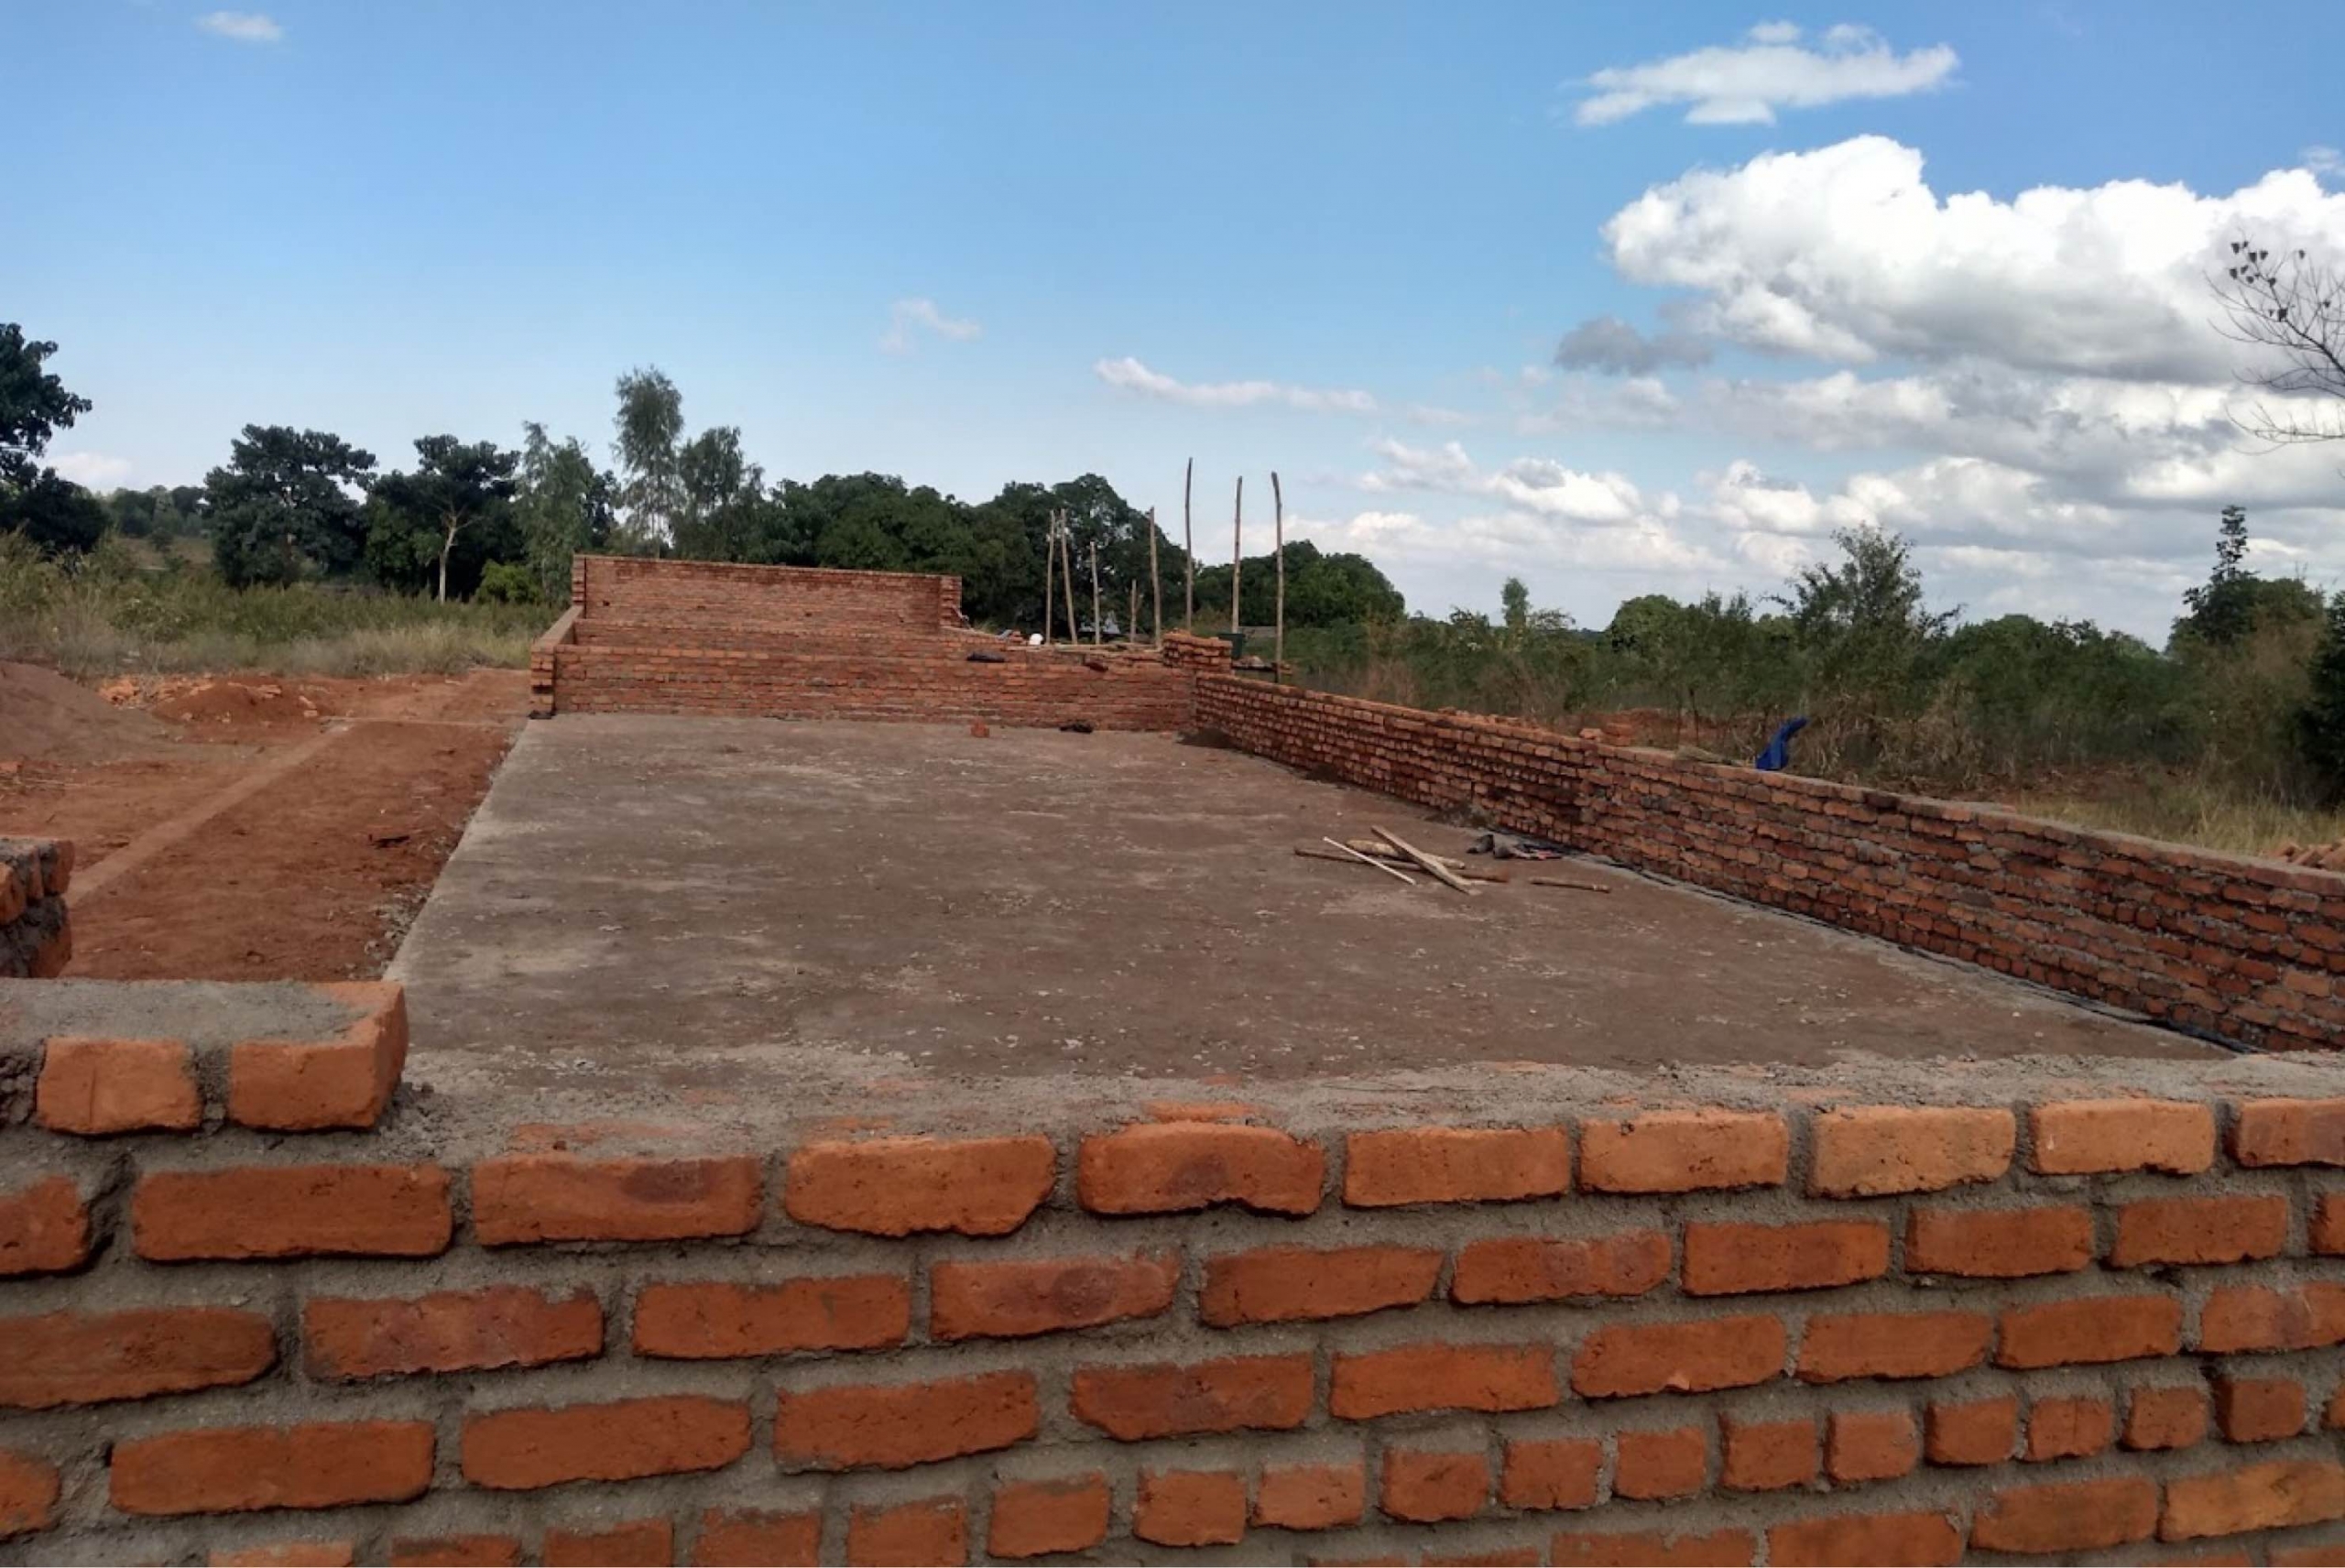 The first classroom block construction is underway.